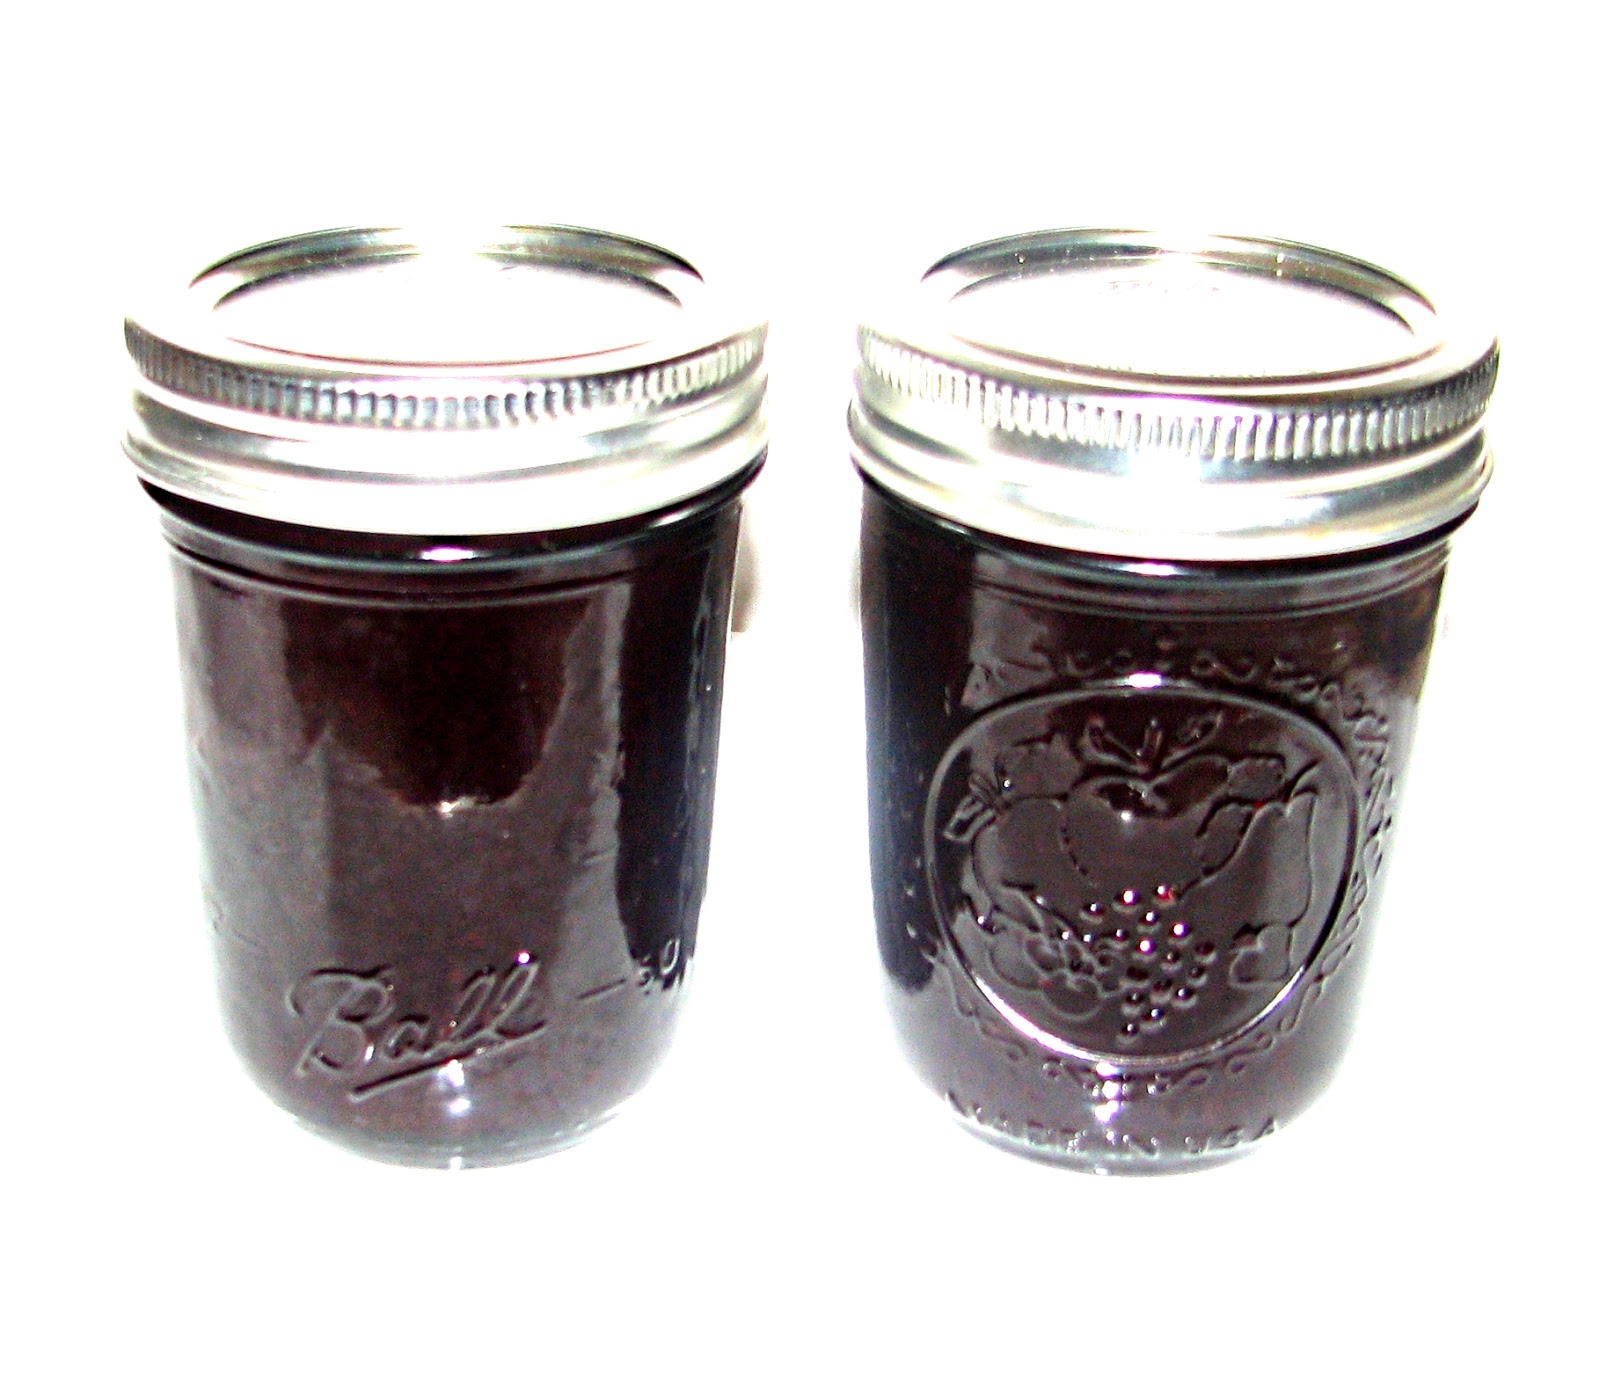 Mulberry and Apple Jelly